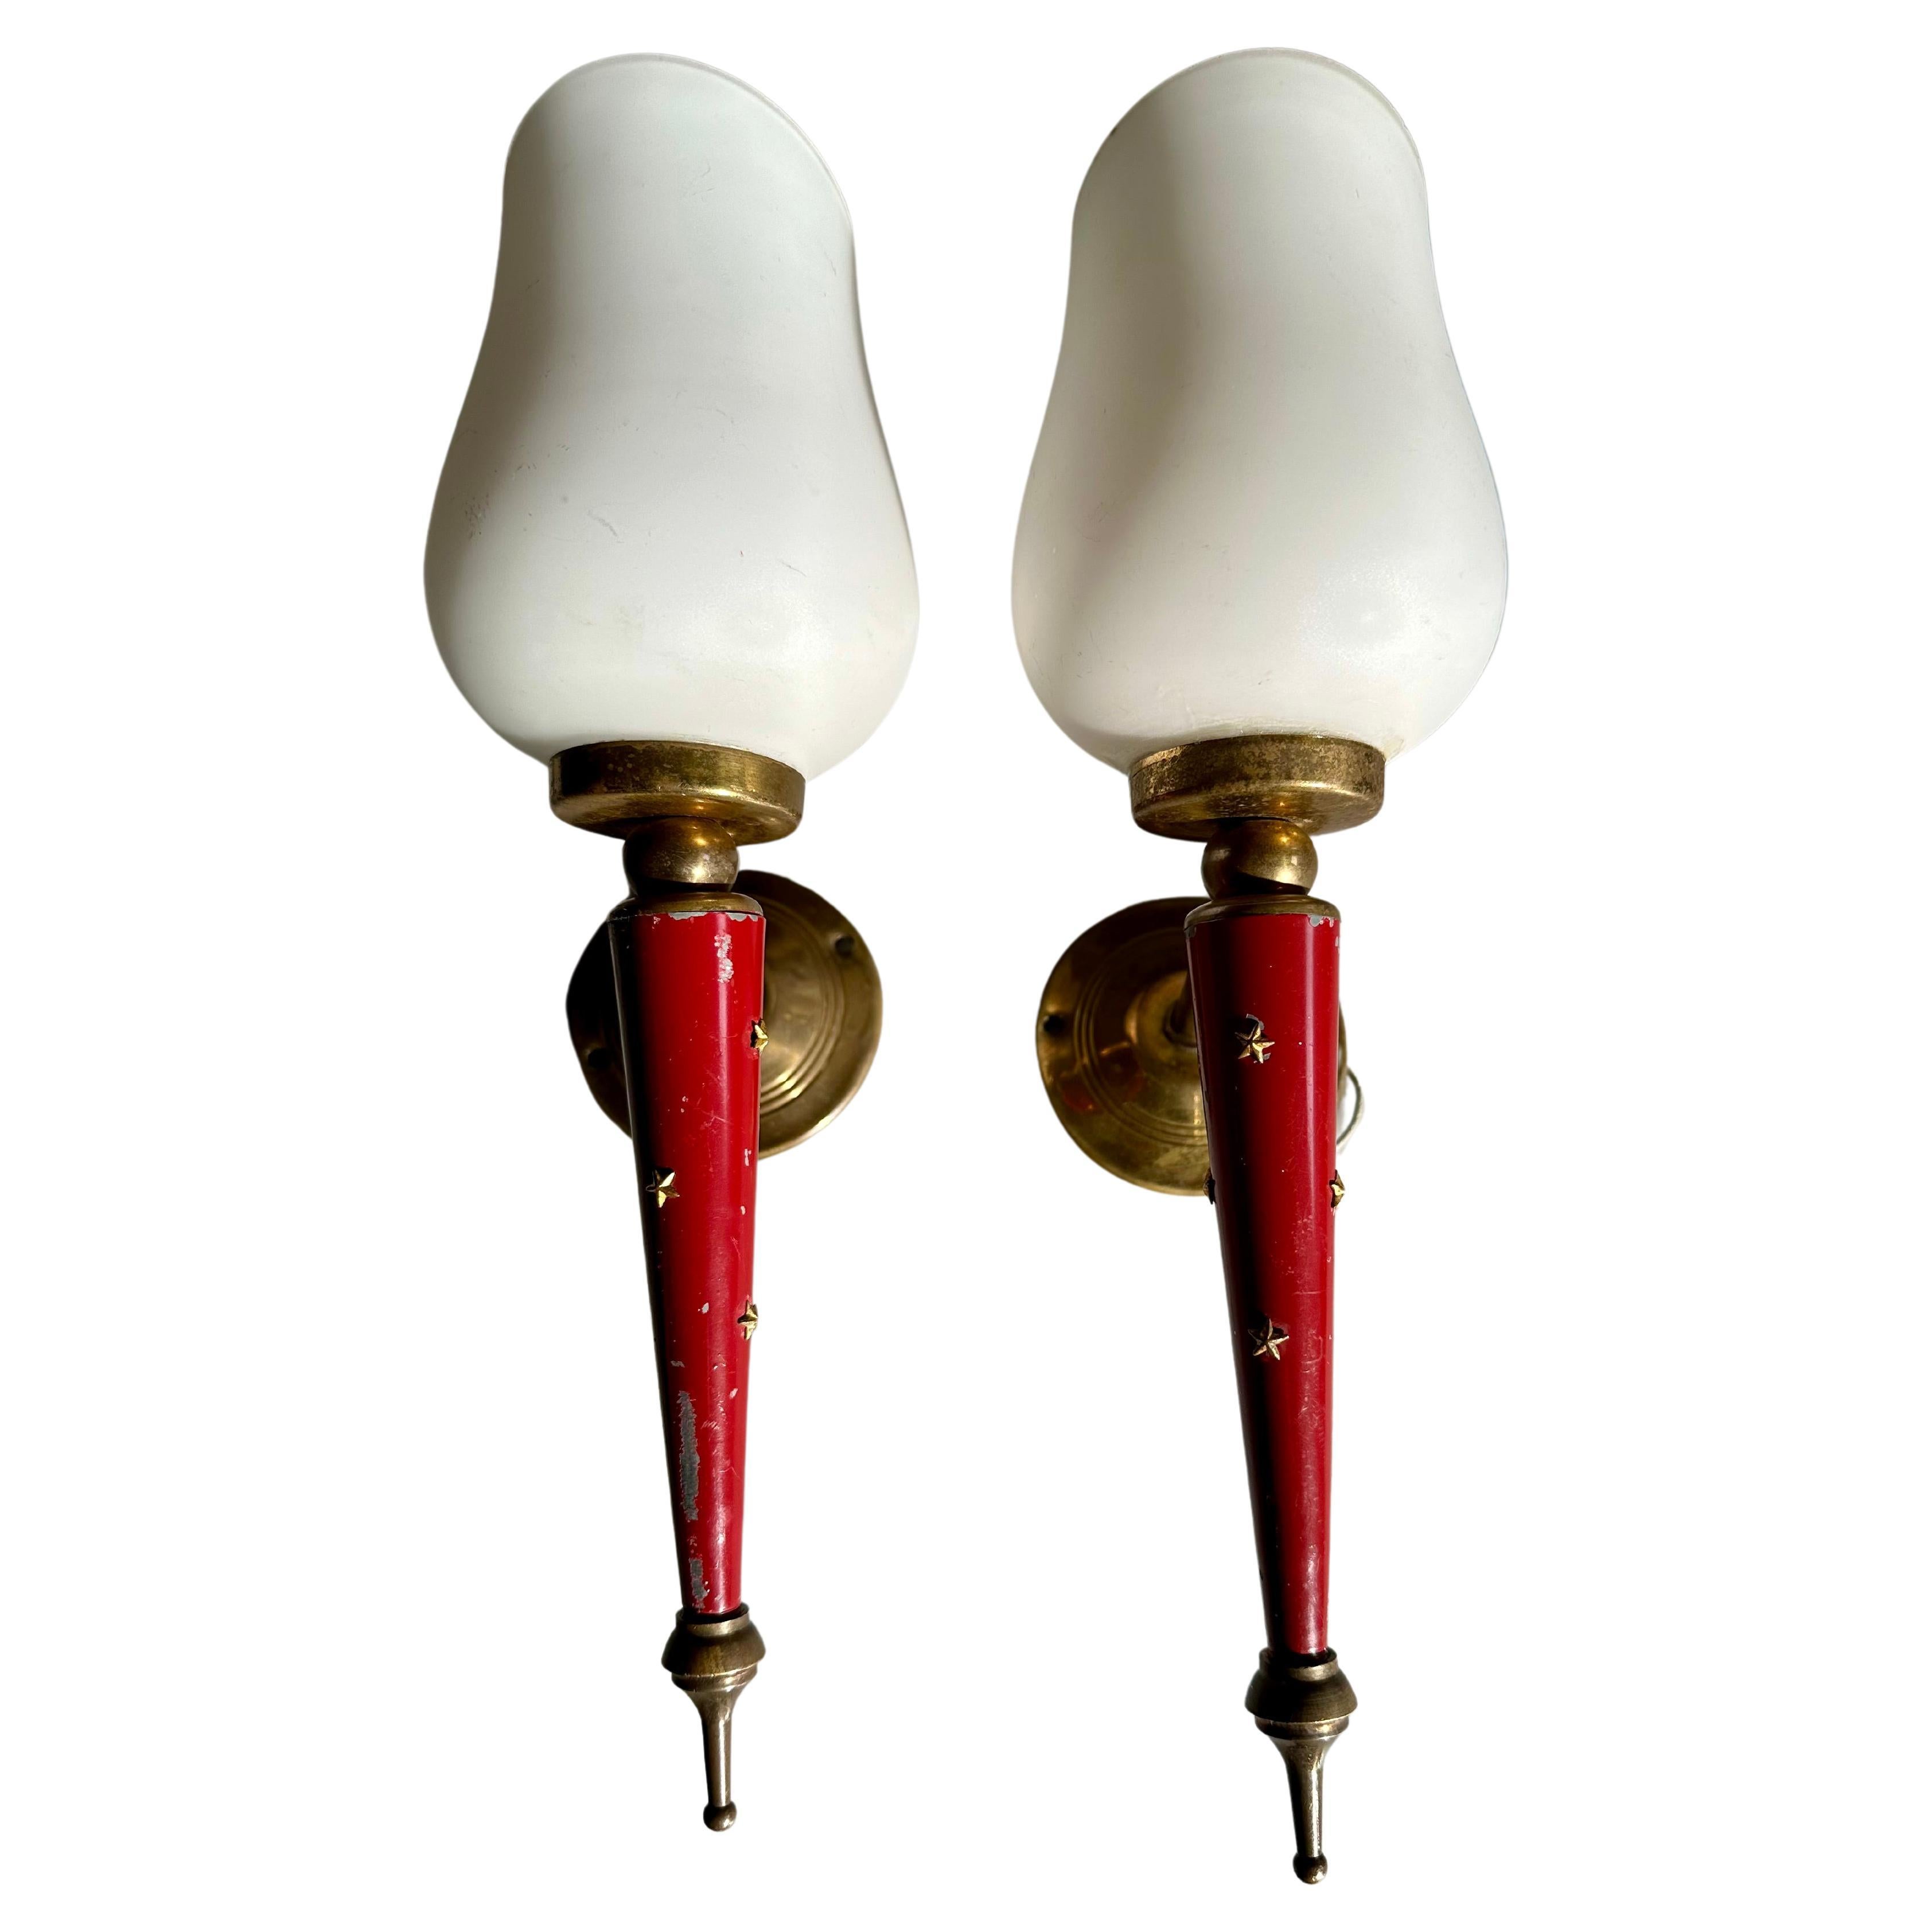 Pair of French Neoclassical Wall Sconces Inspired by Maison Arlus, with stars For Sale